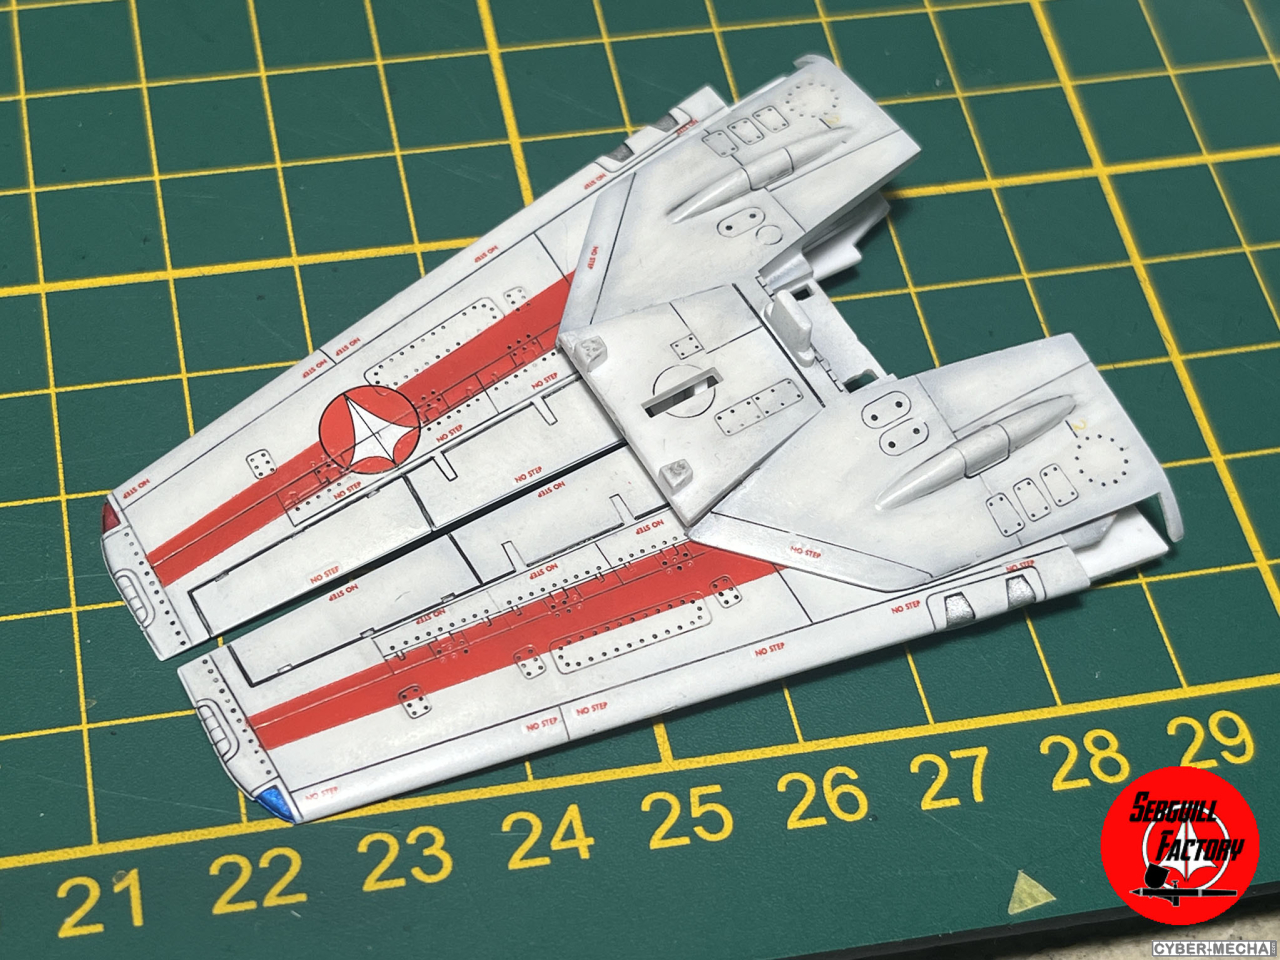 [Hasegawa] 1/72 - VF-1j Armored valkyrie  - Page 3 1708882660